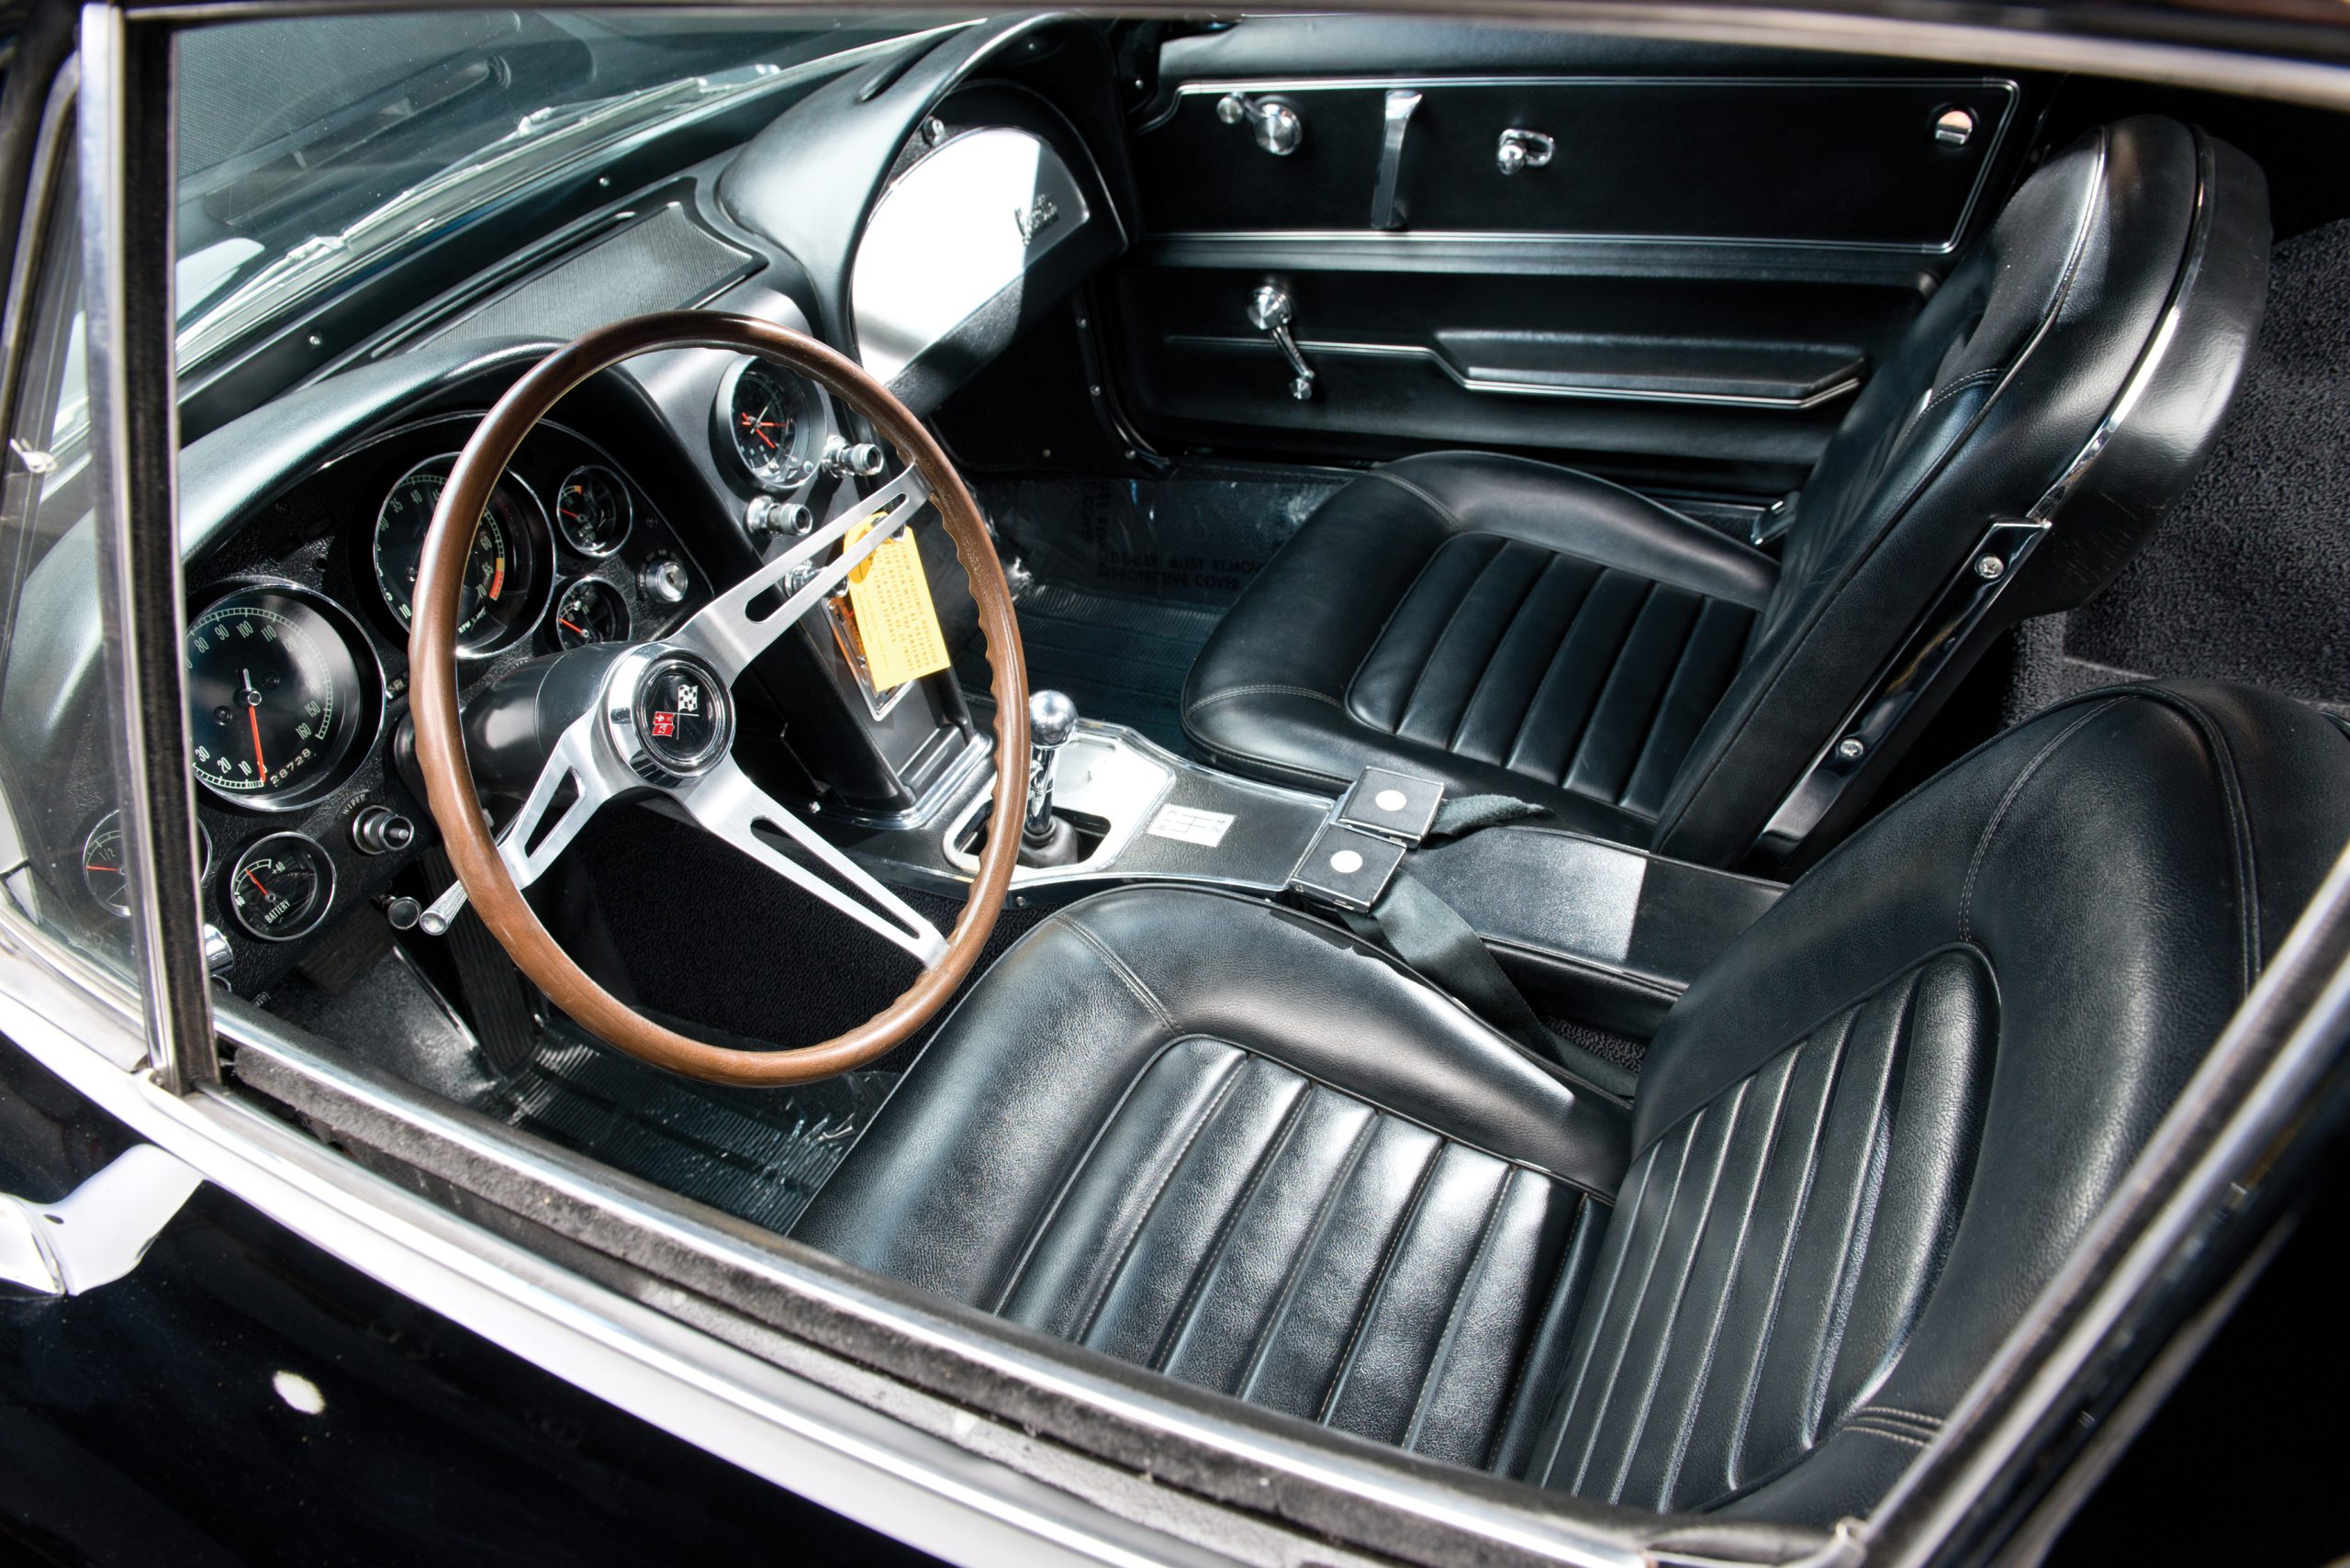  1966 Chevrolet Corvette Sting Ray 427/425 Coupe Darin Schnabel ©2013 Courtesy of RM Auctions